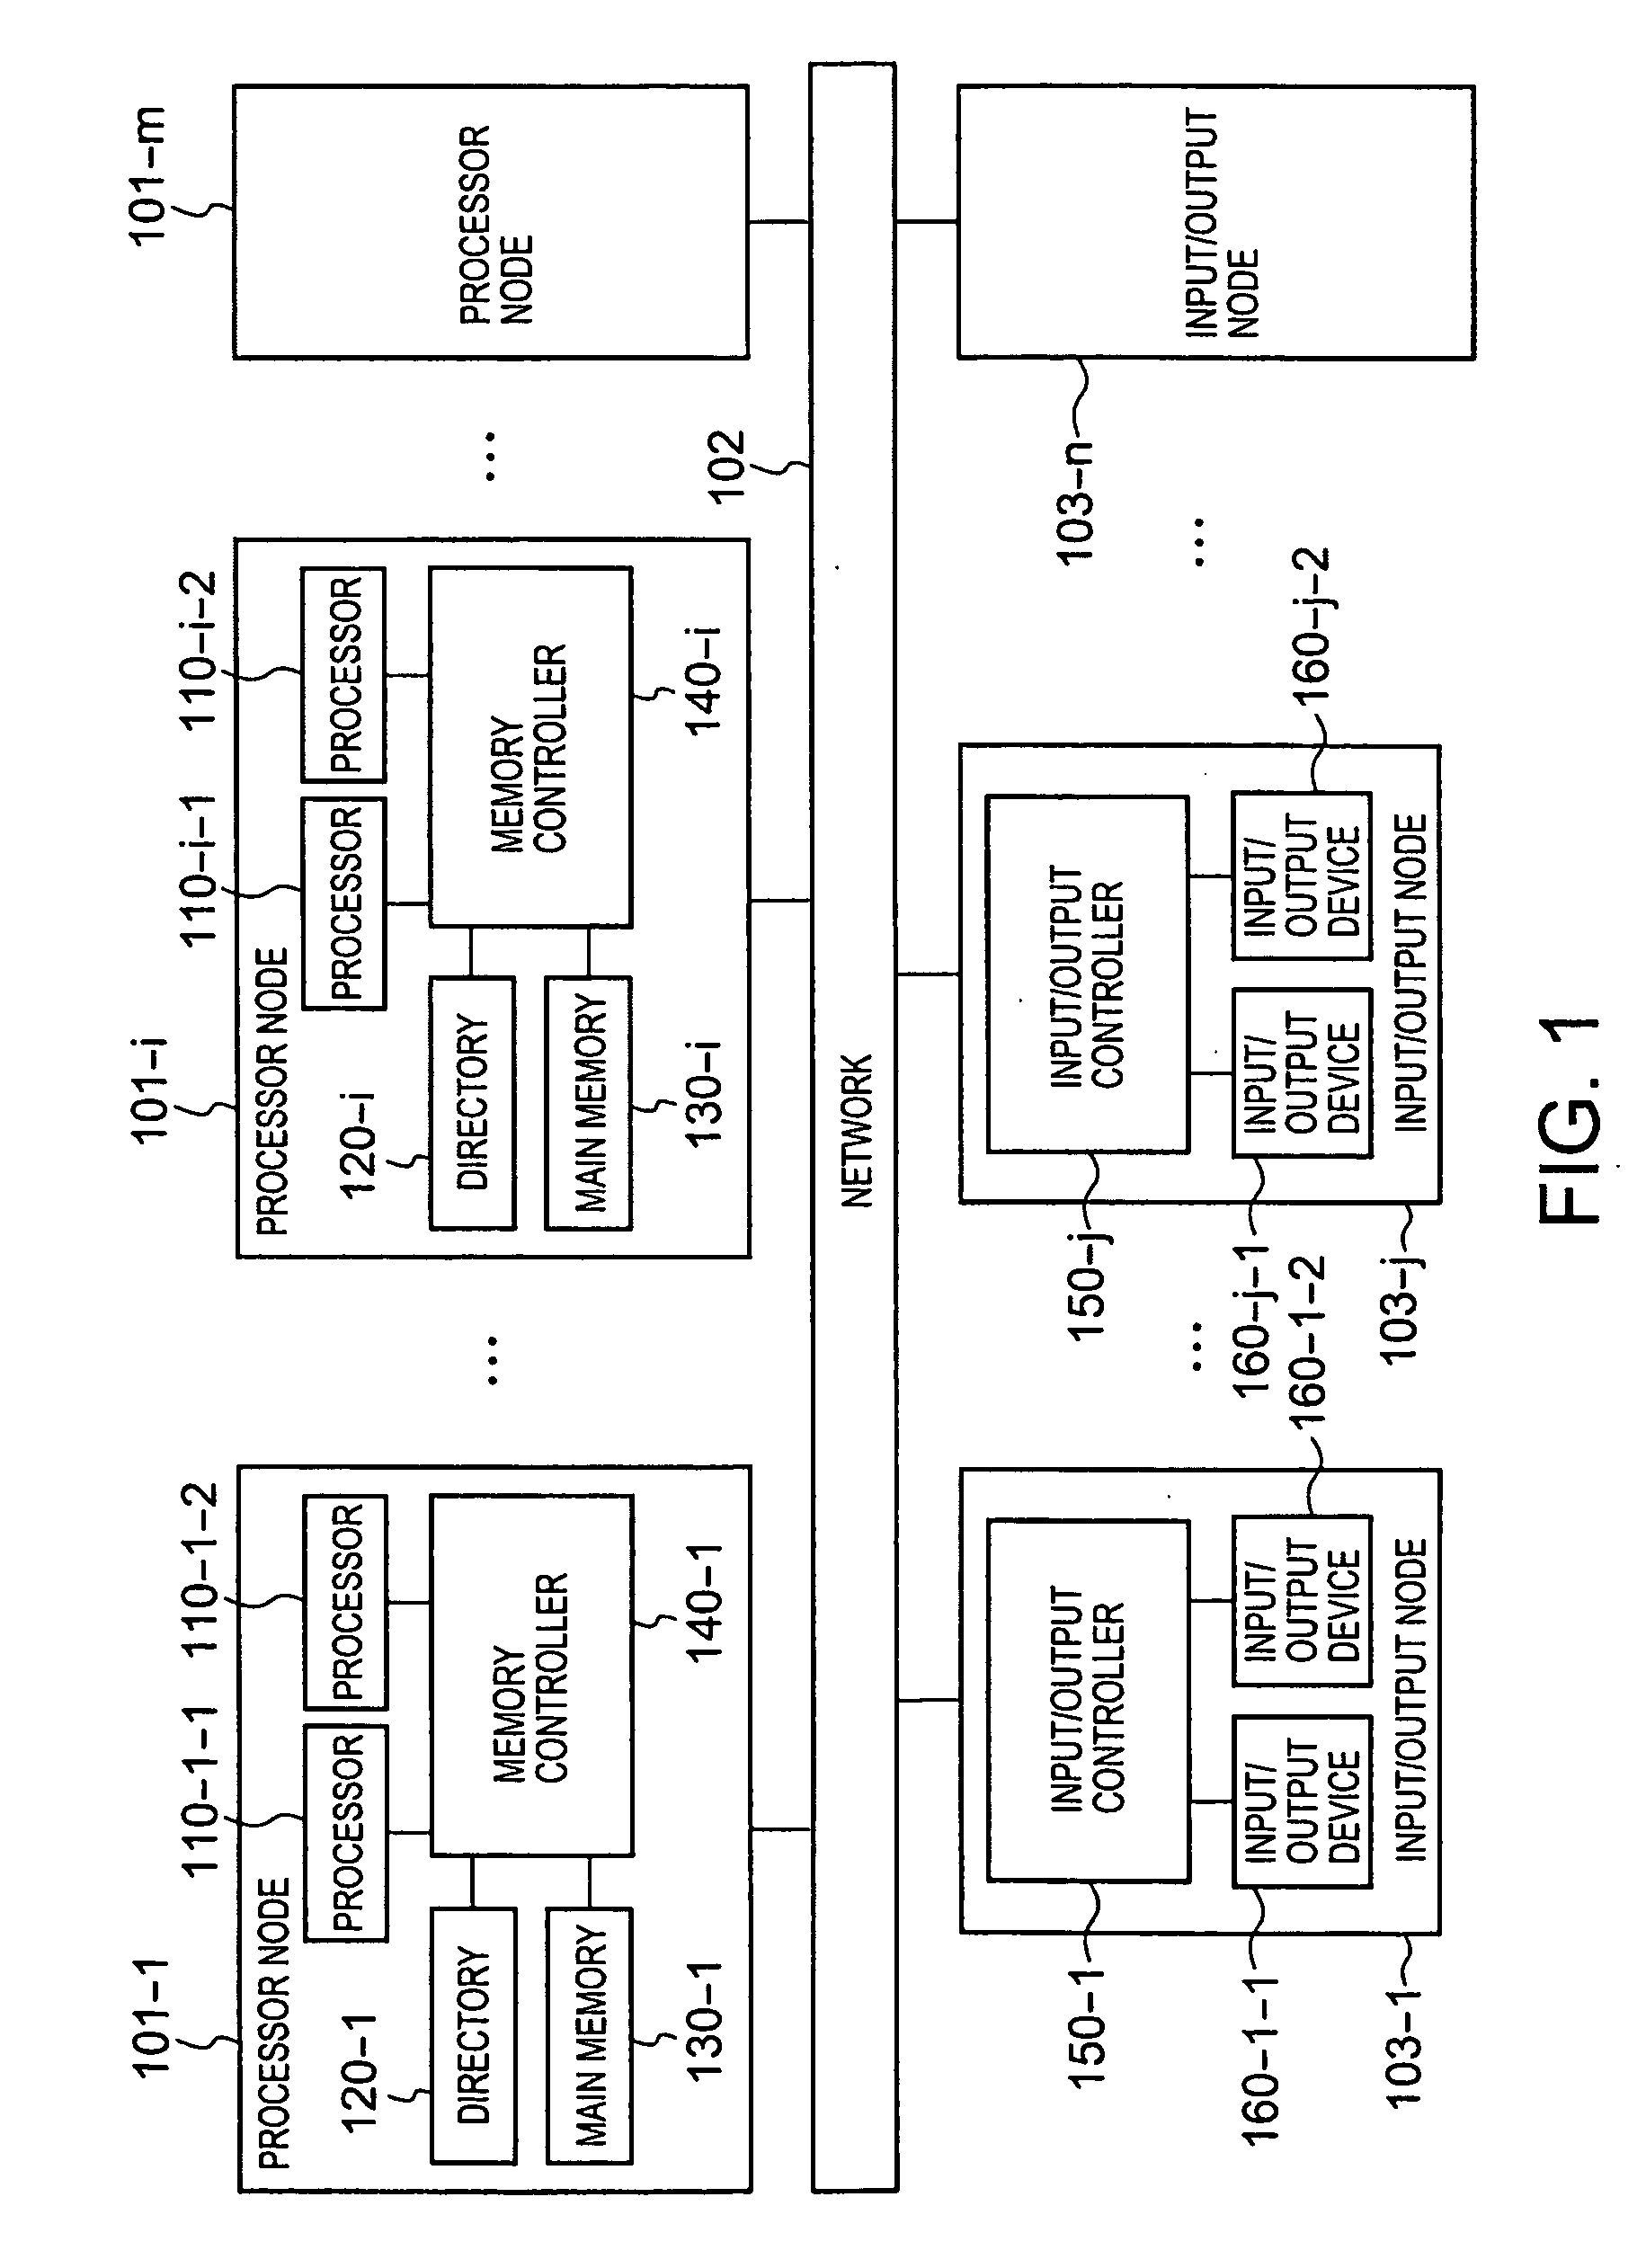 Multiprocessor System and Method for Processing Memory Access